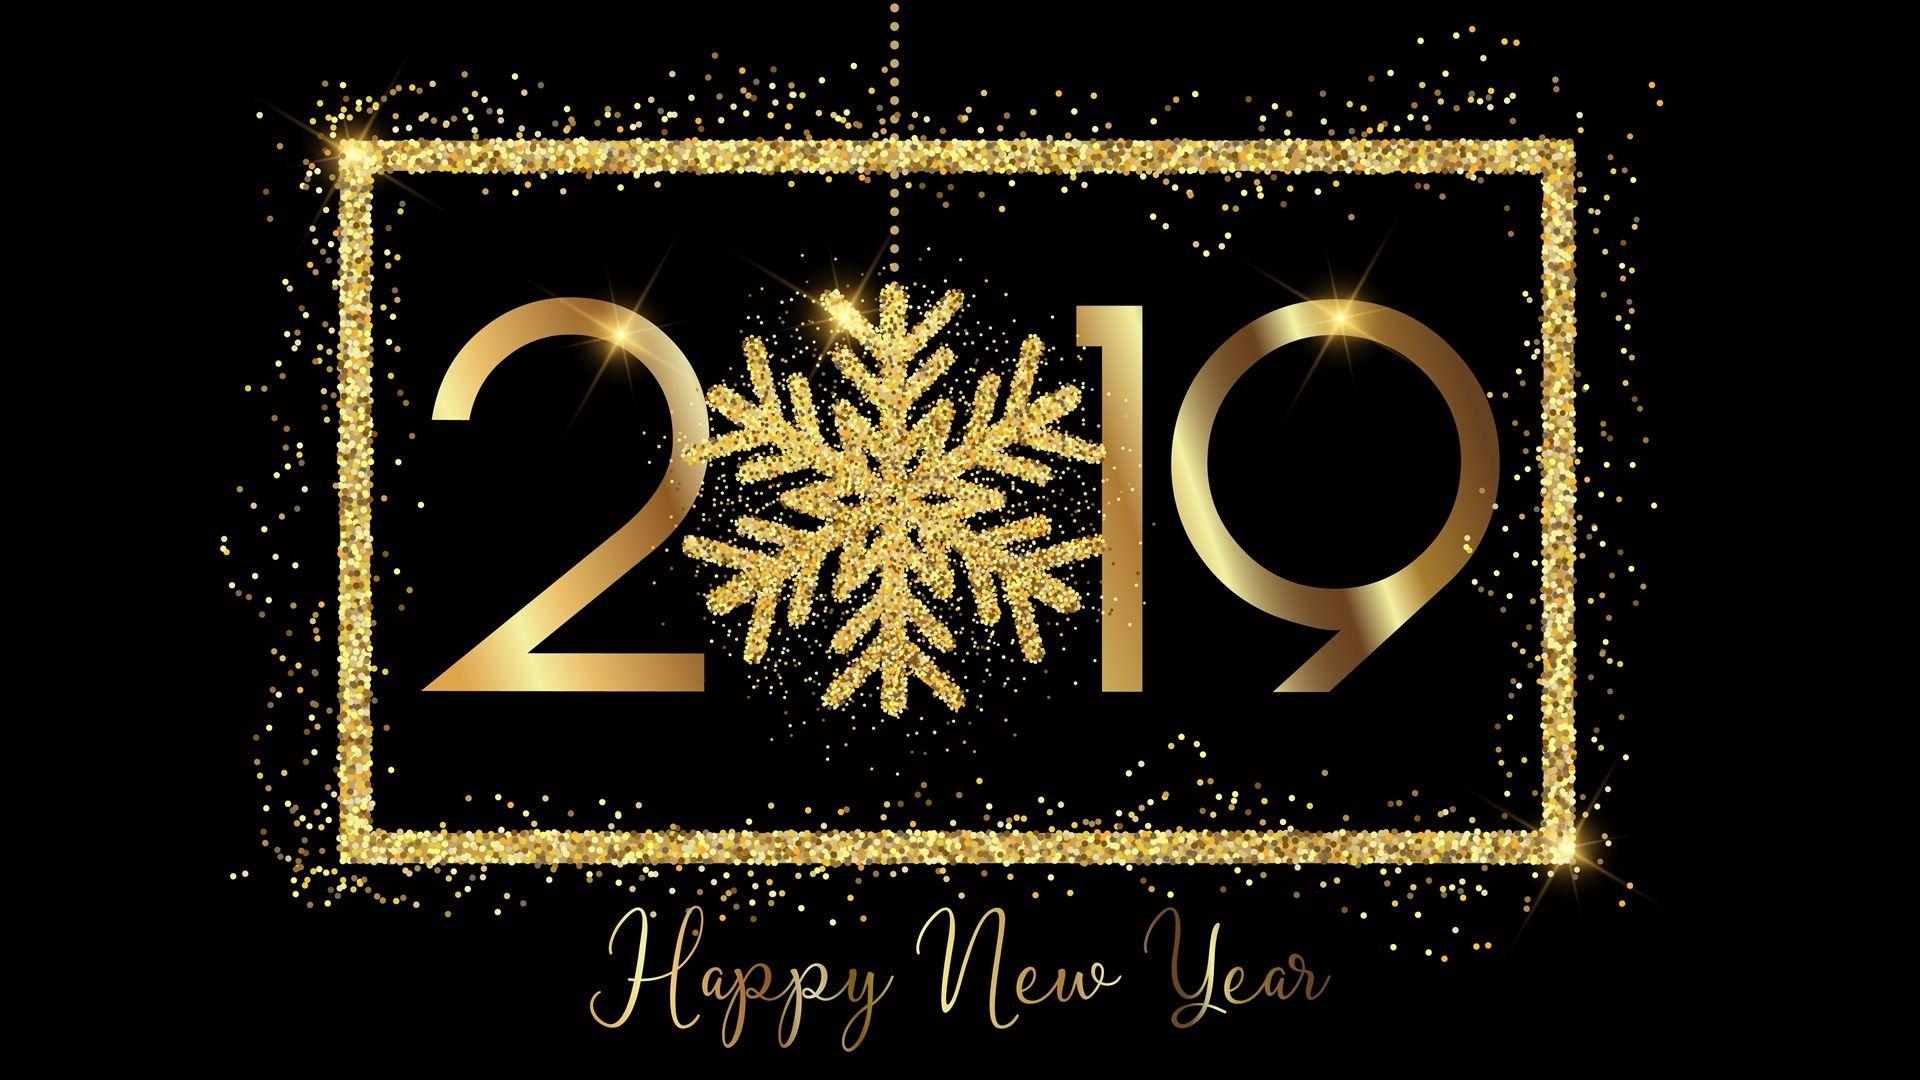 Happy New Year 2019 HD Wallpaper Background, Image, Photo. New